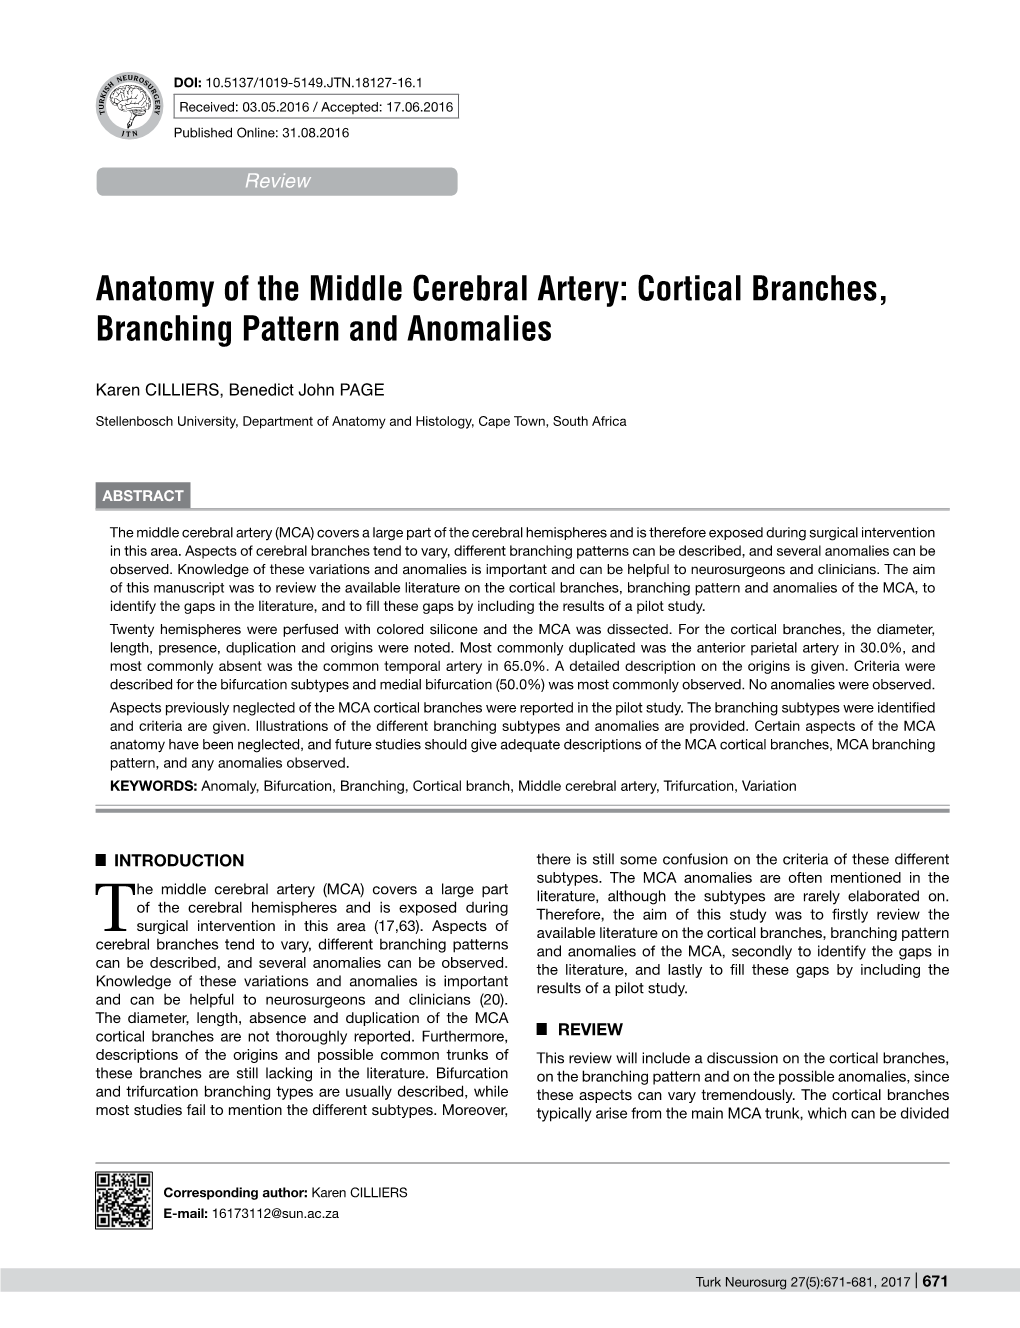 Anatomy of the Middle Cerebral Artery: Cortical Branches, Branching Pattern and Anomalies